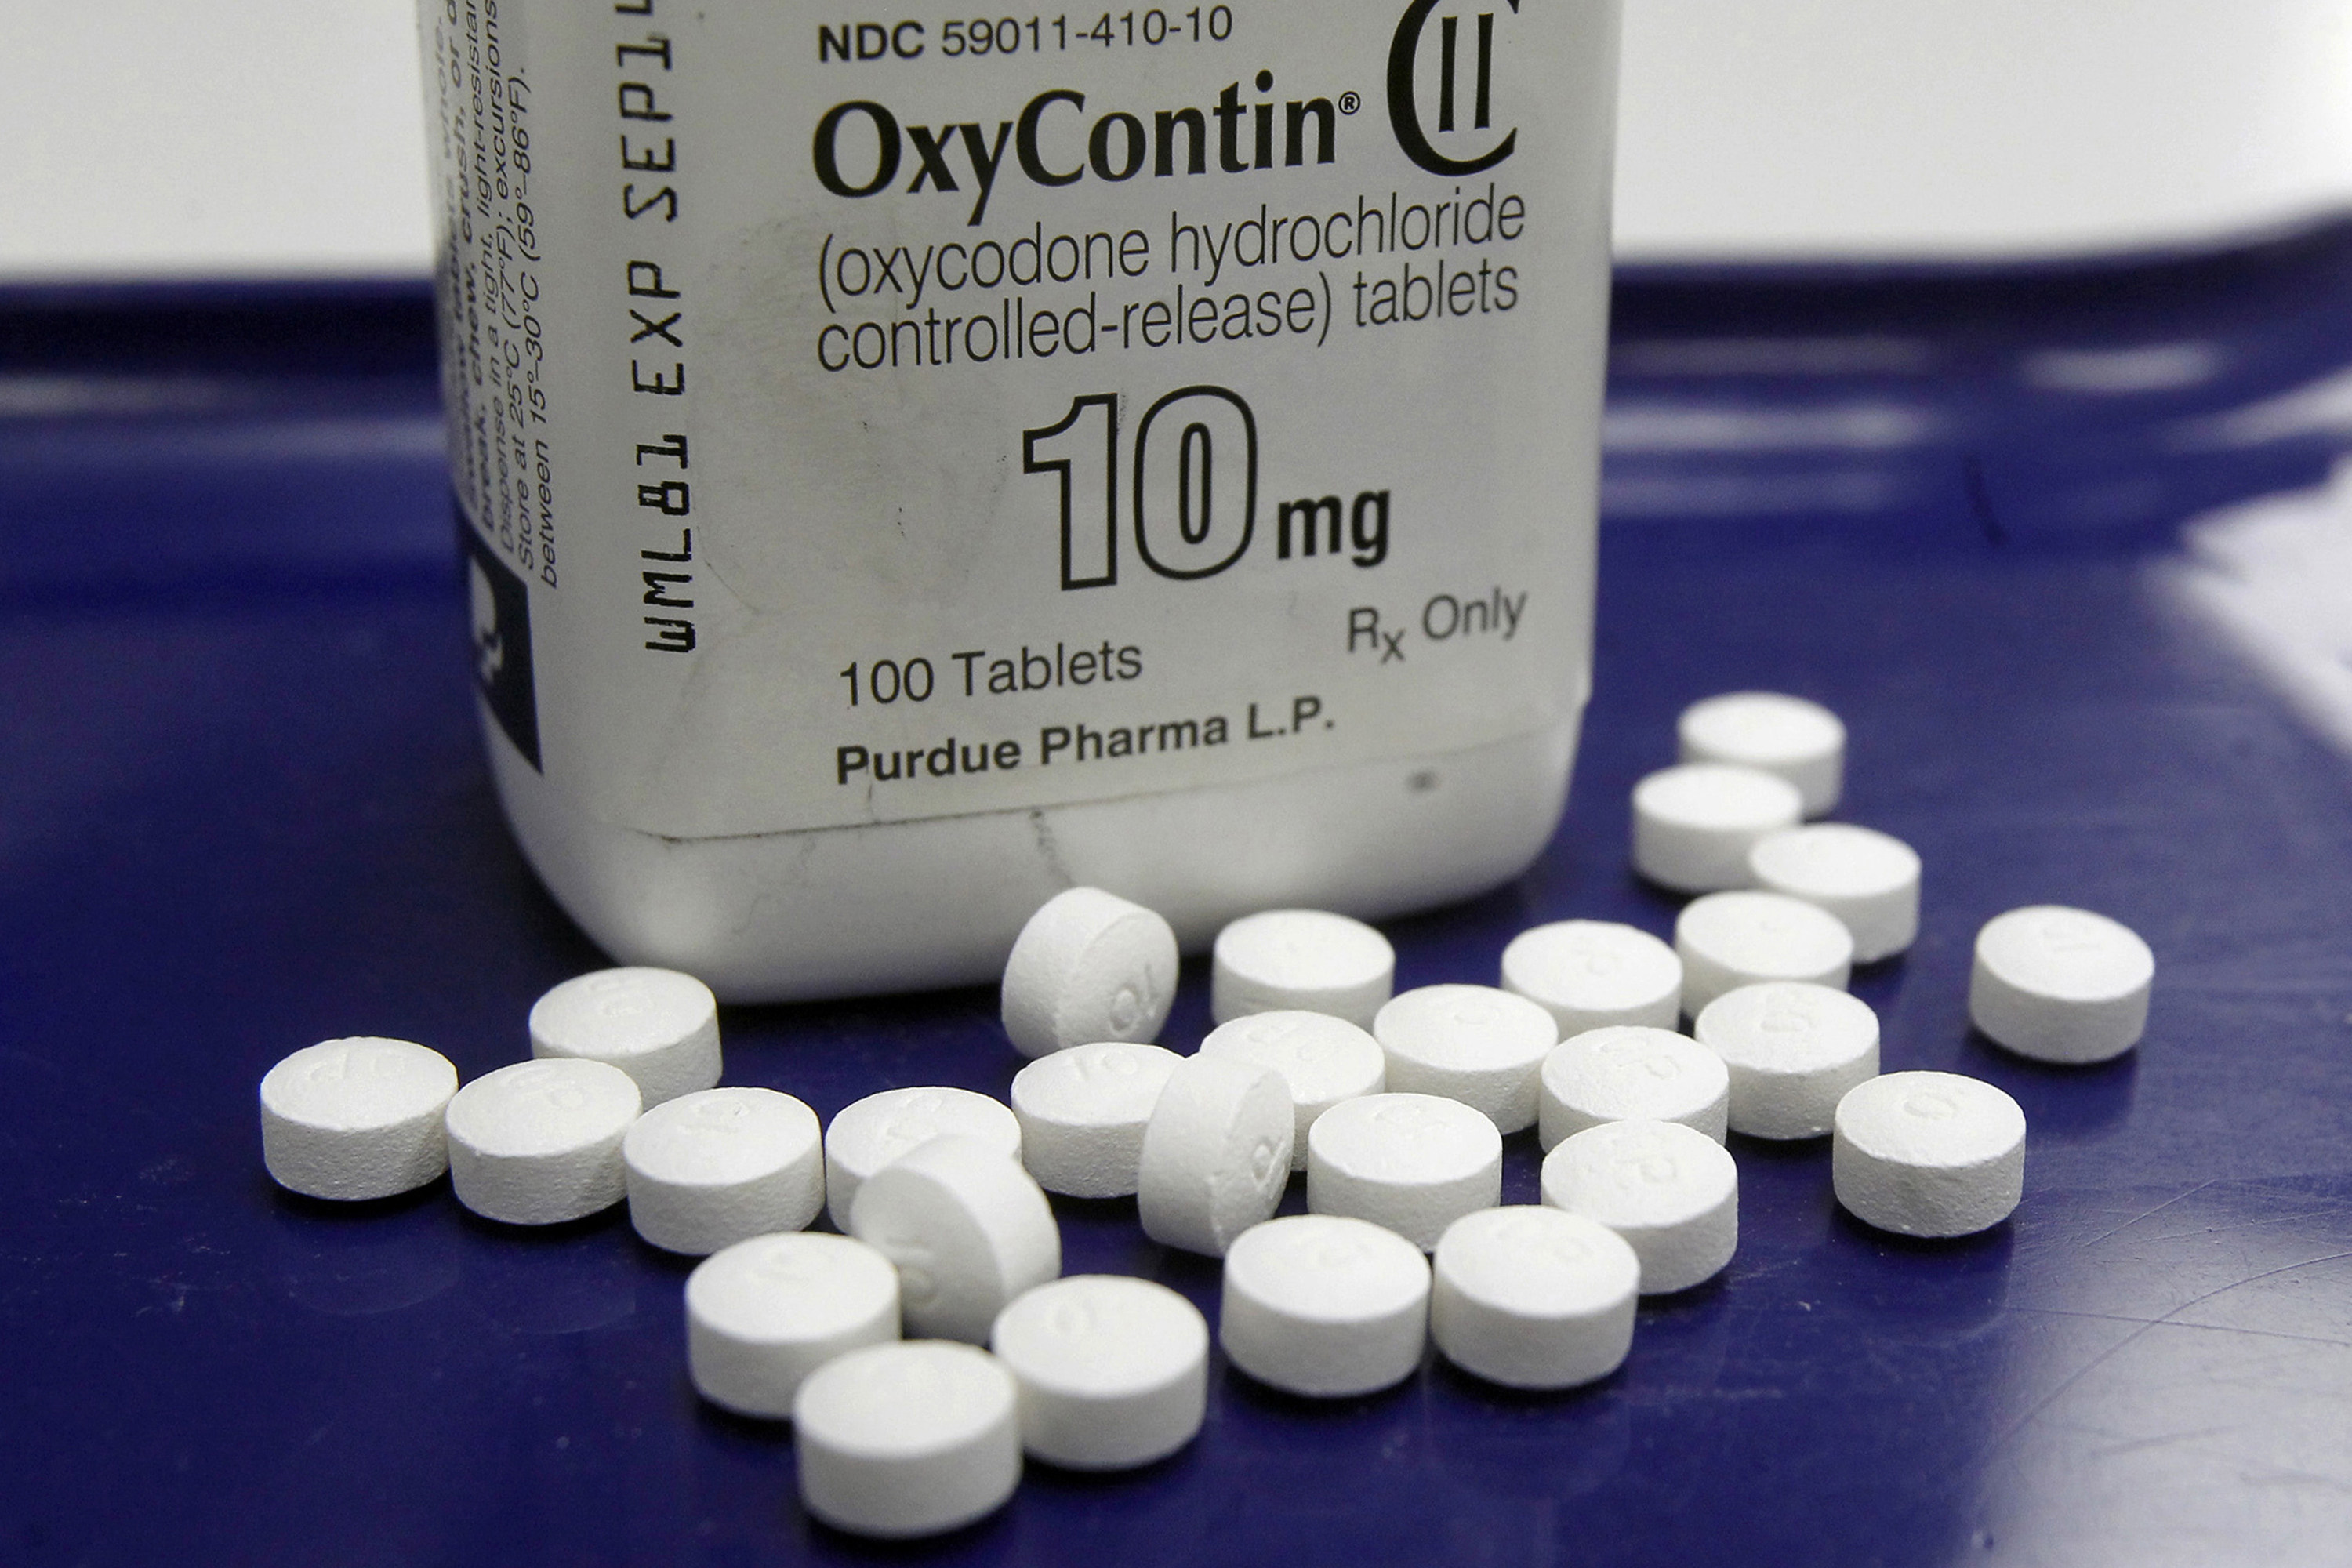 Thousands of Americans have become addicted to powerful painkillers such as Oxyxontin (above), a story dramatised in new Netflix series “Painkiller”. China had its own opioid crisis two centuries earlier. Photo: AP